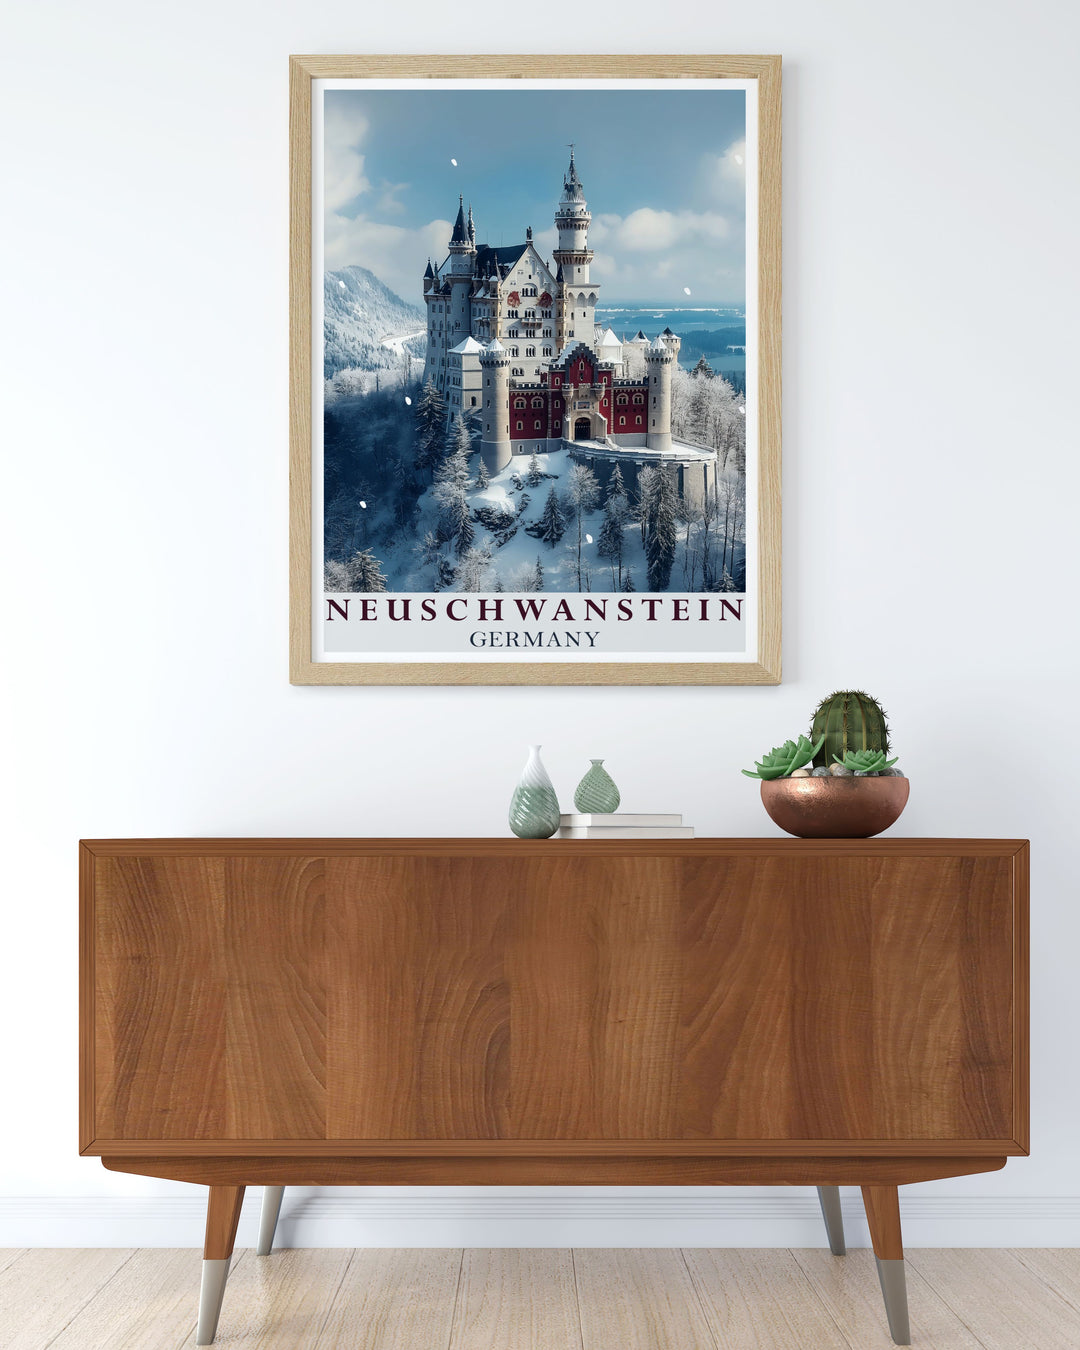 Neuschwanstein Castle home decor collection featuring matted art and botanical garden themes. These elegant pieces bring a touch of history and refinement to any living space.